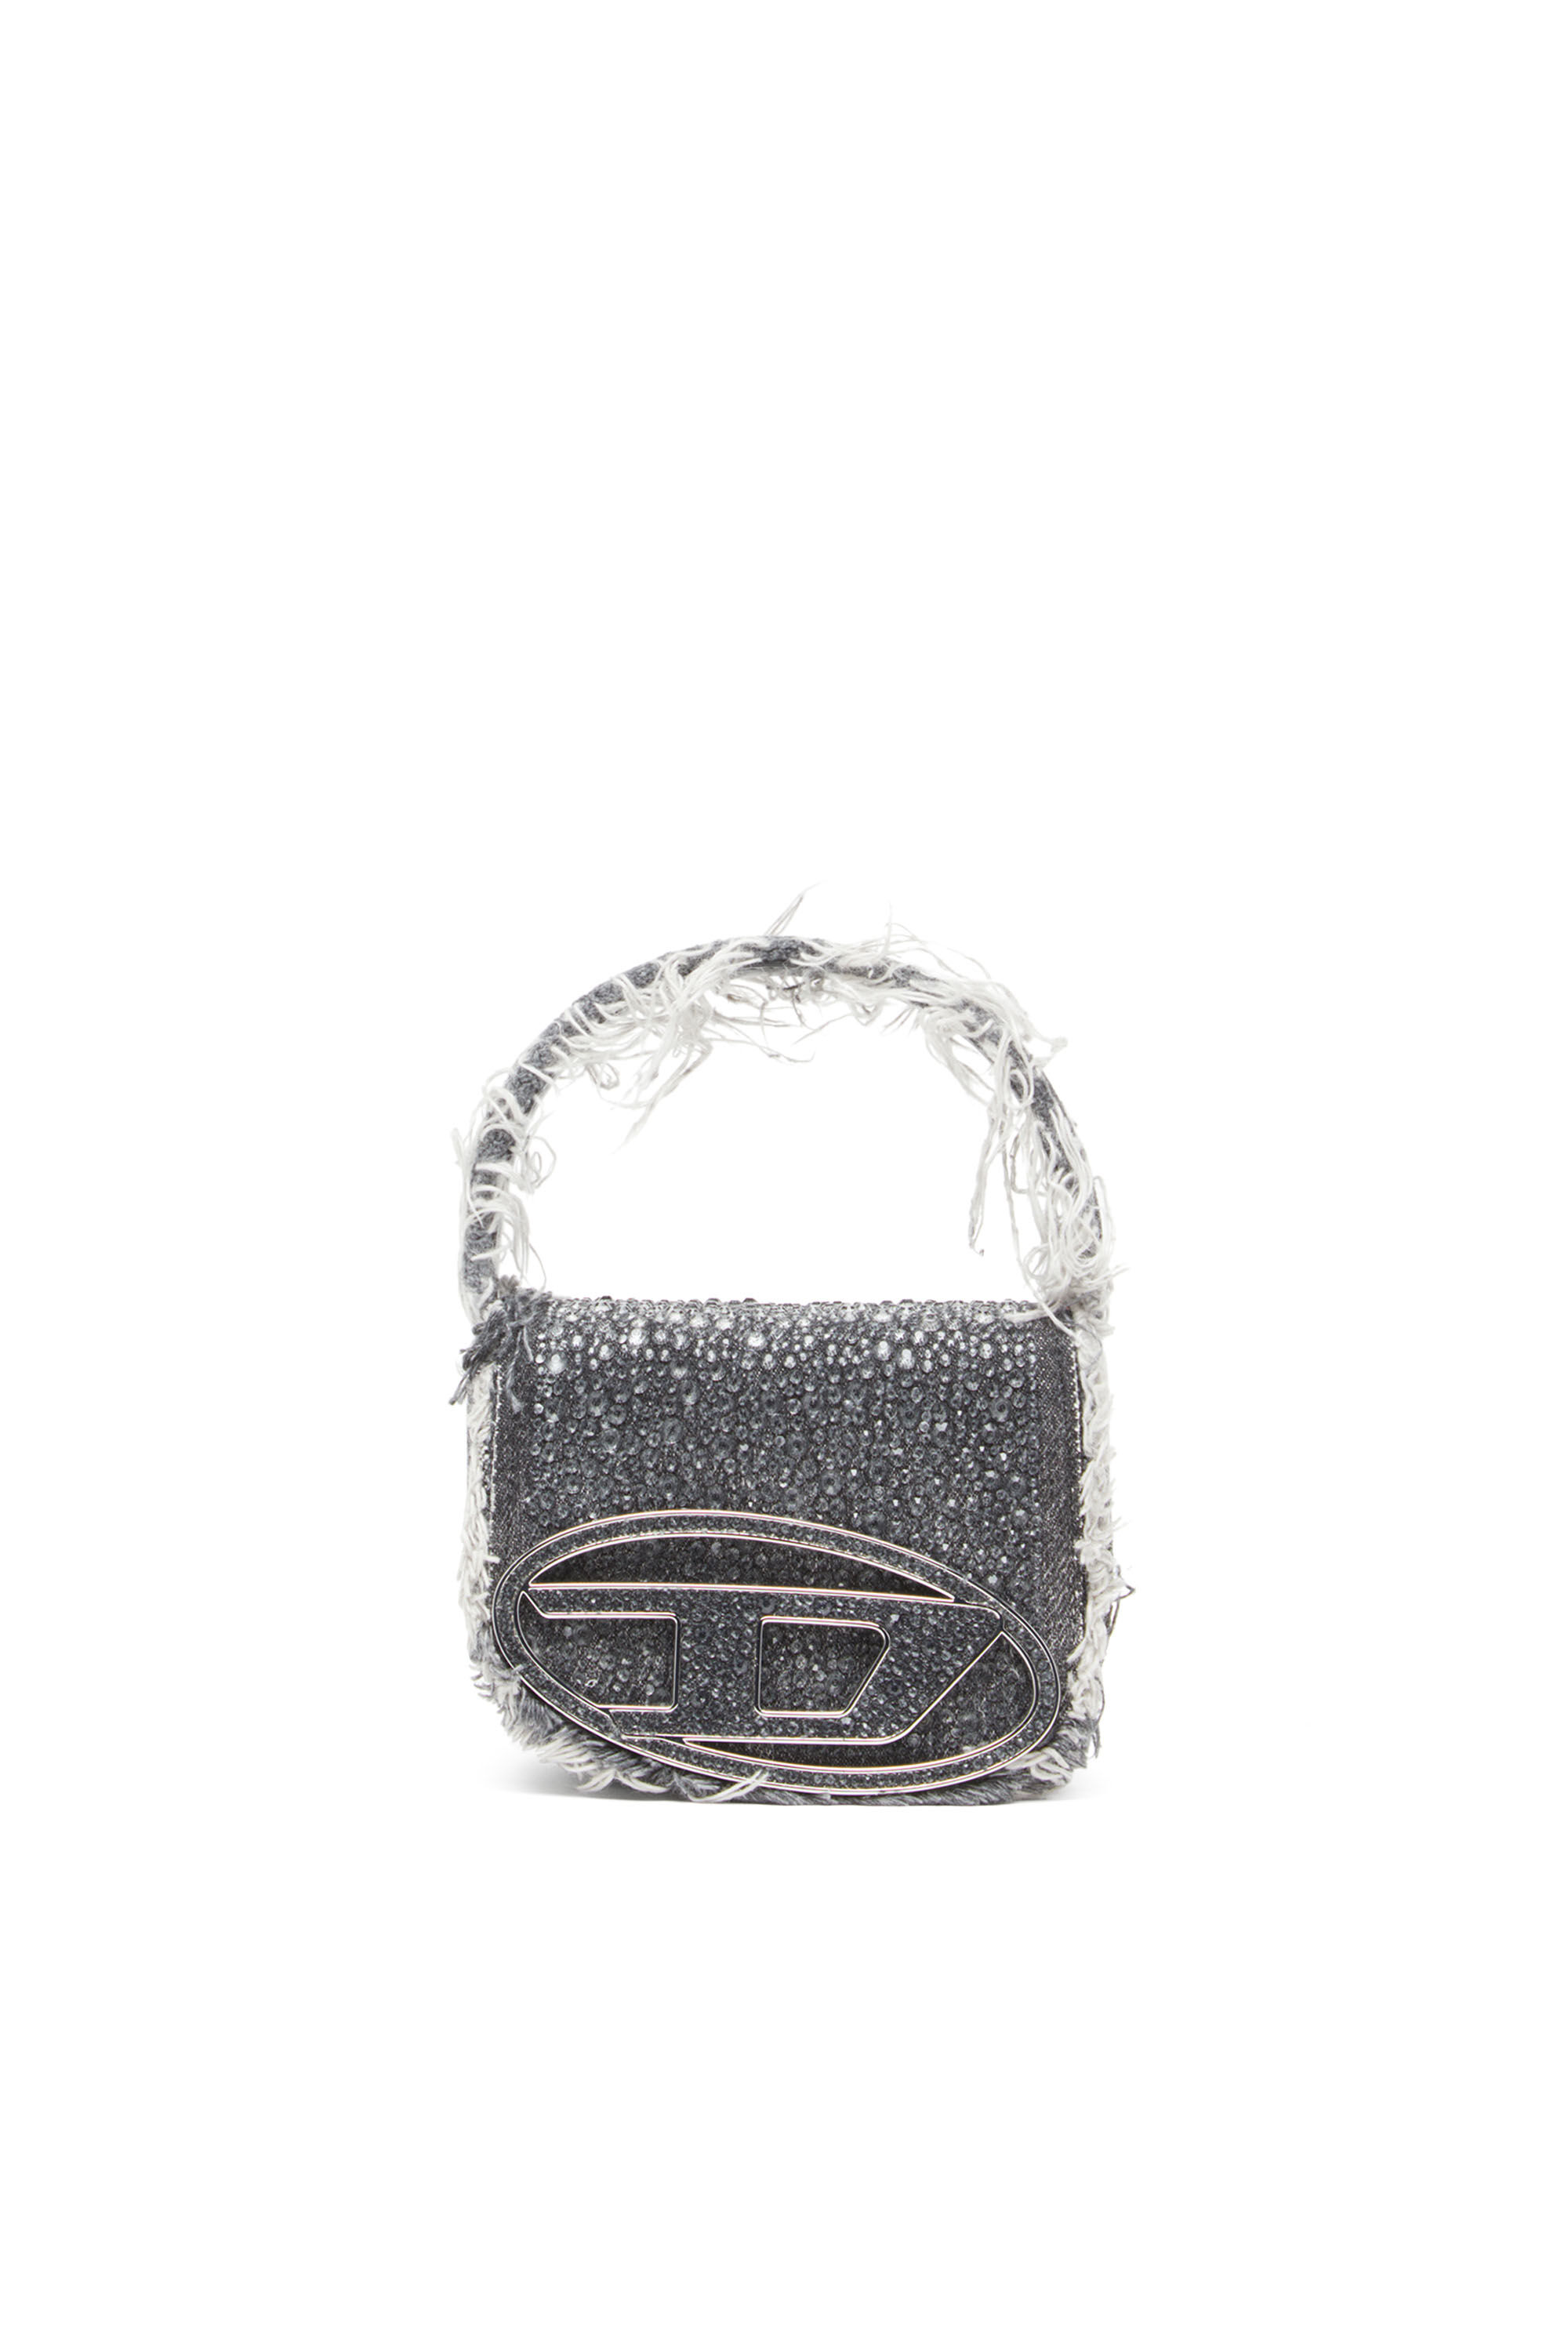 Diesel - 1DR XS, Woman 1DR XS-Iconic mini bag in denim and crystals in Black - Image 1